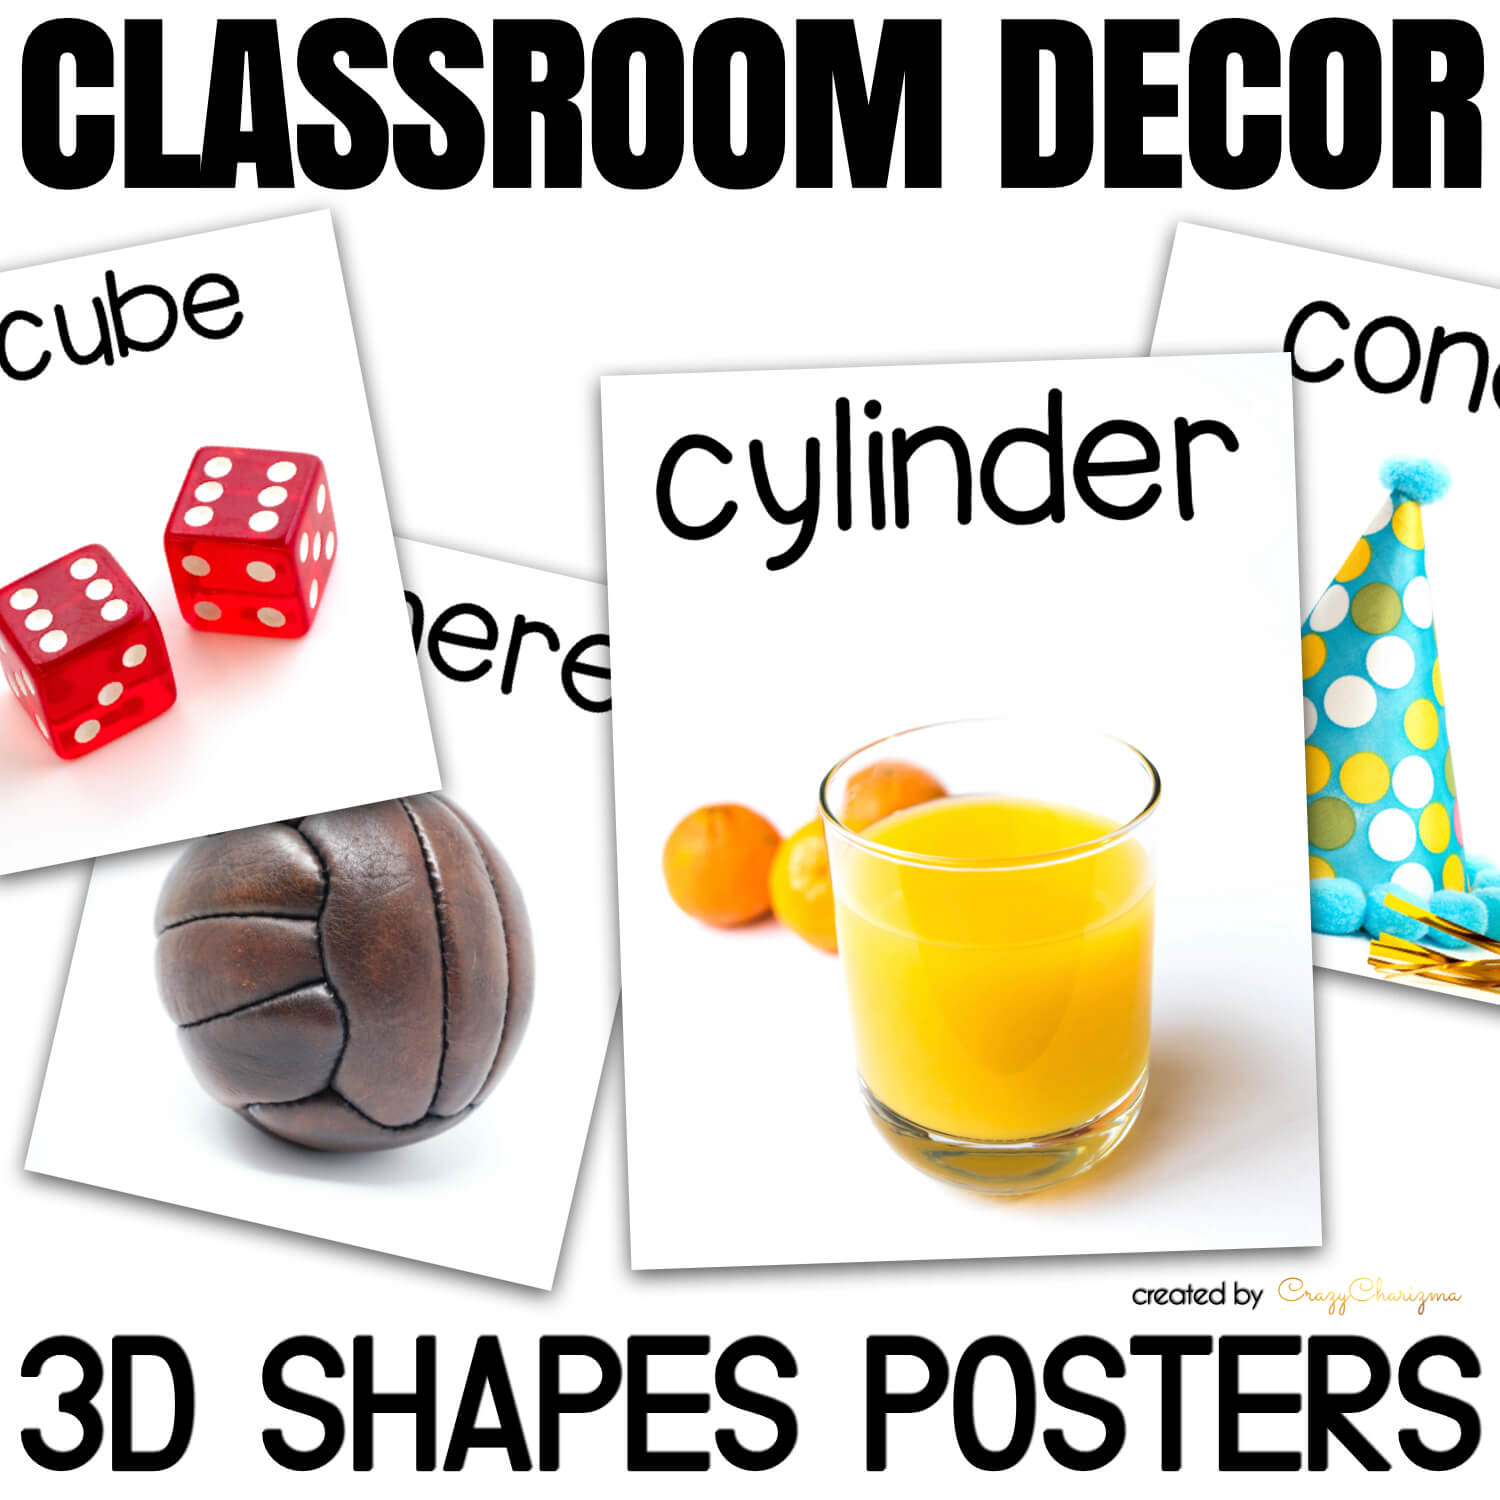 Looking for vibrant 3D shape posters with real-life objects? I’ve got you covered! Modern look, bright colors, easy to understand objects with 3D shapes.